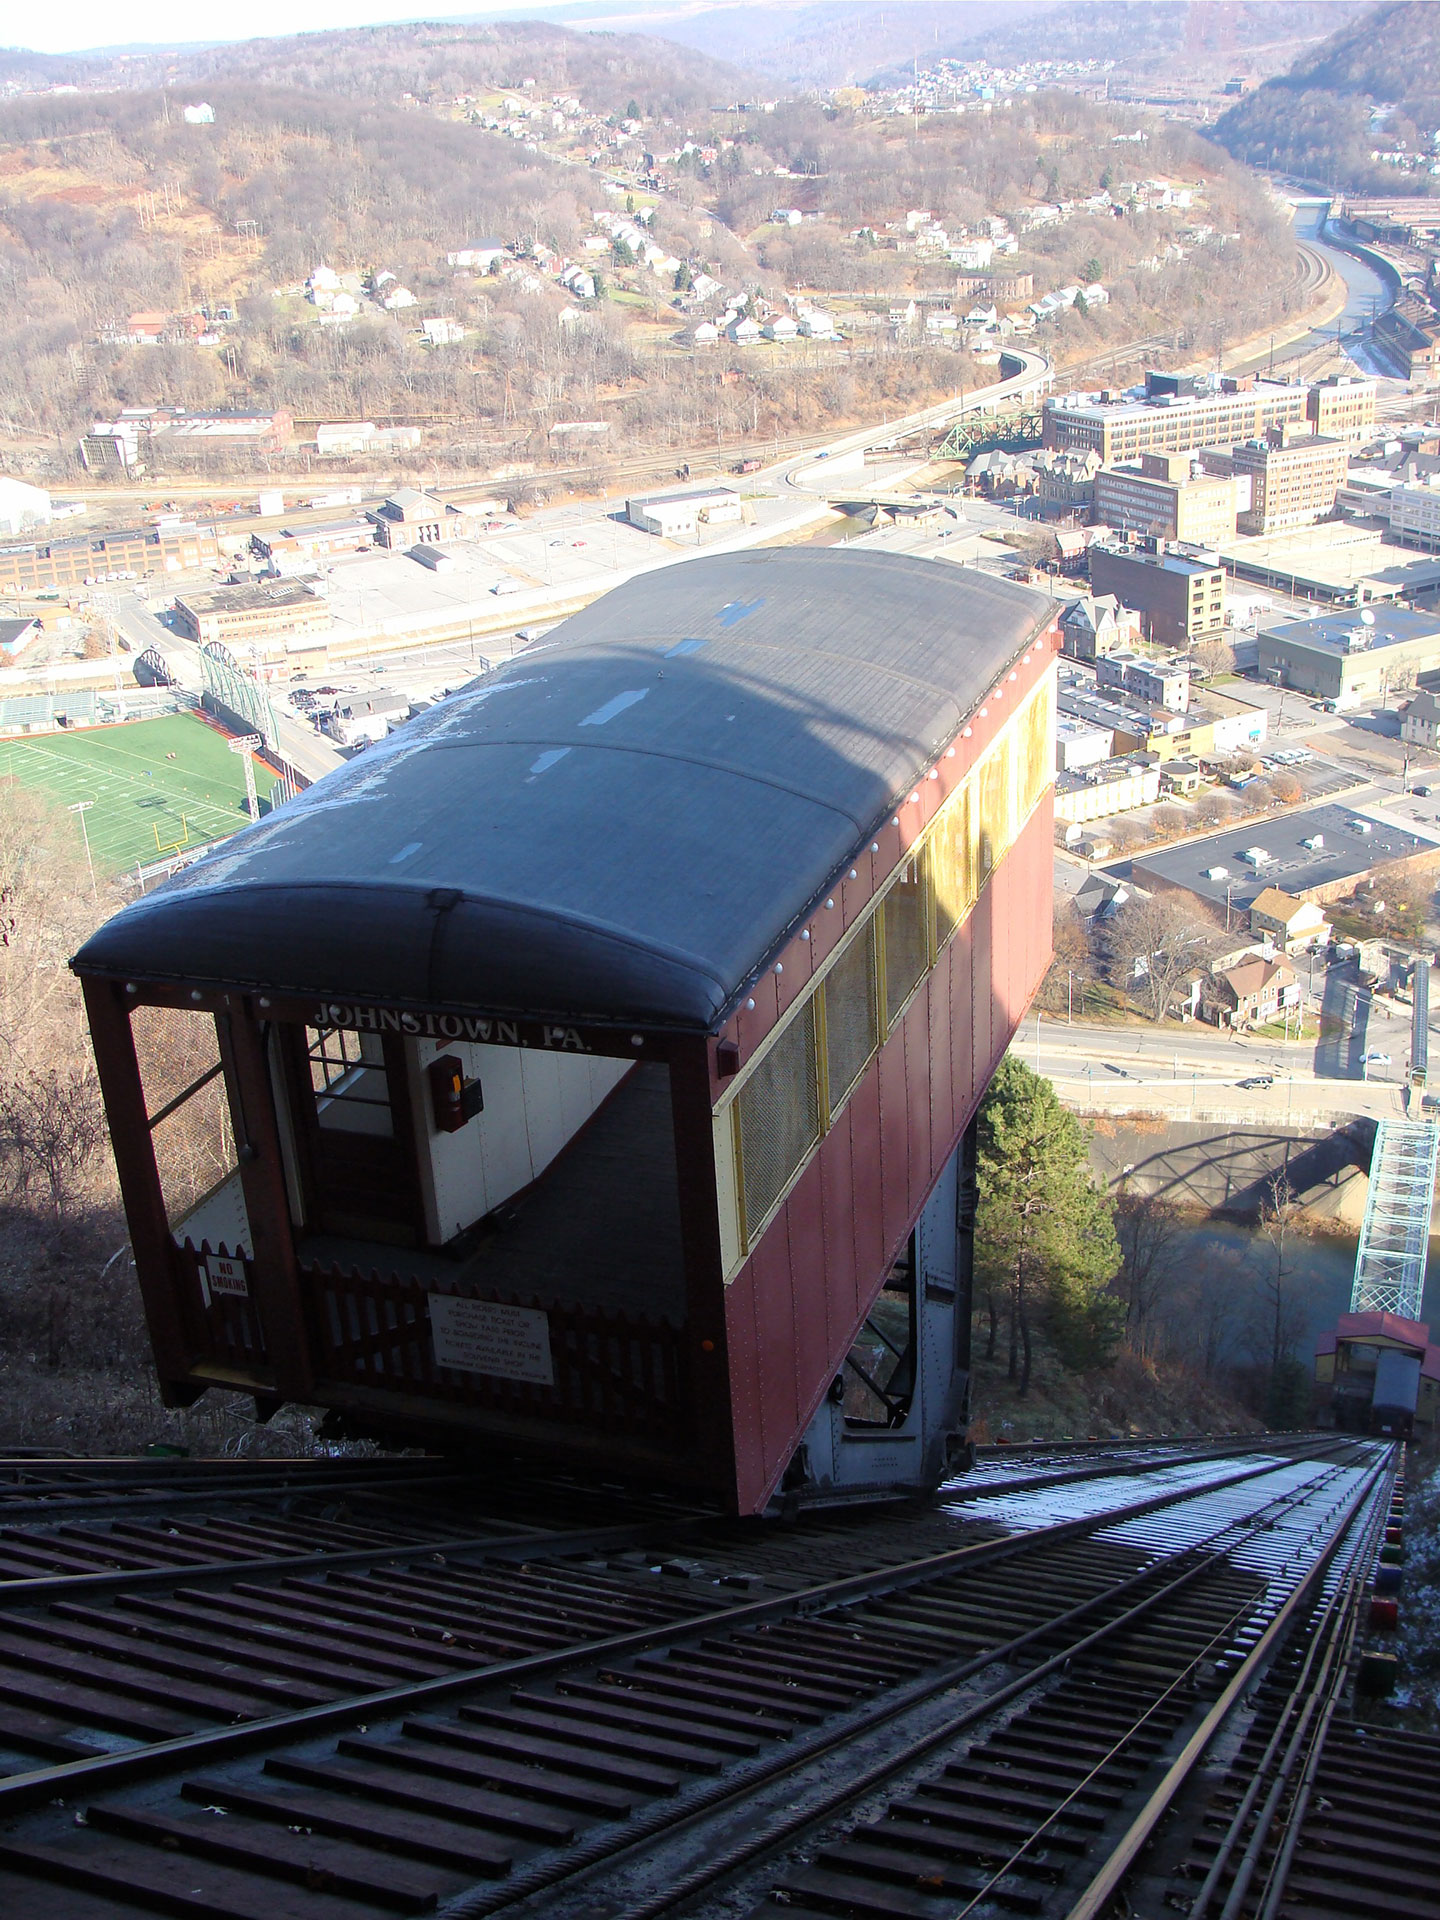 Inclined Plane Railway (Funicular)